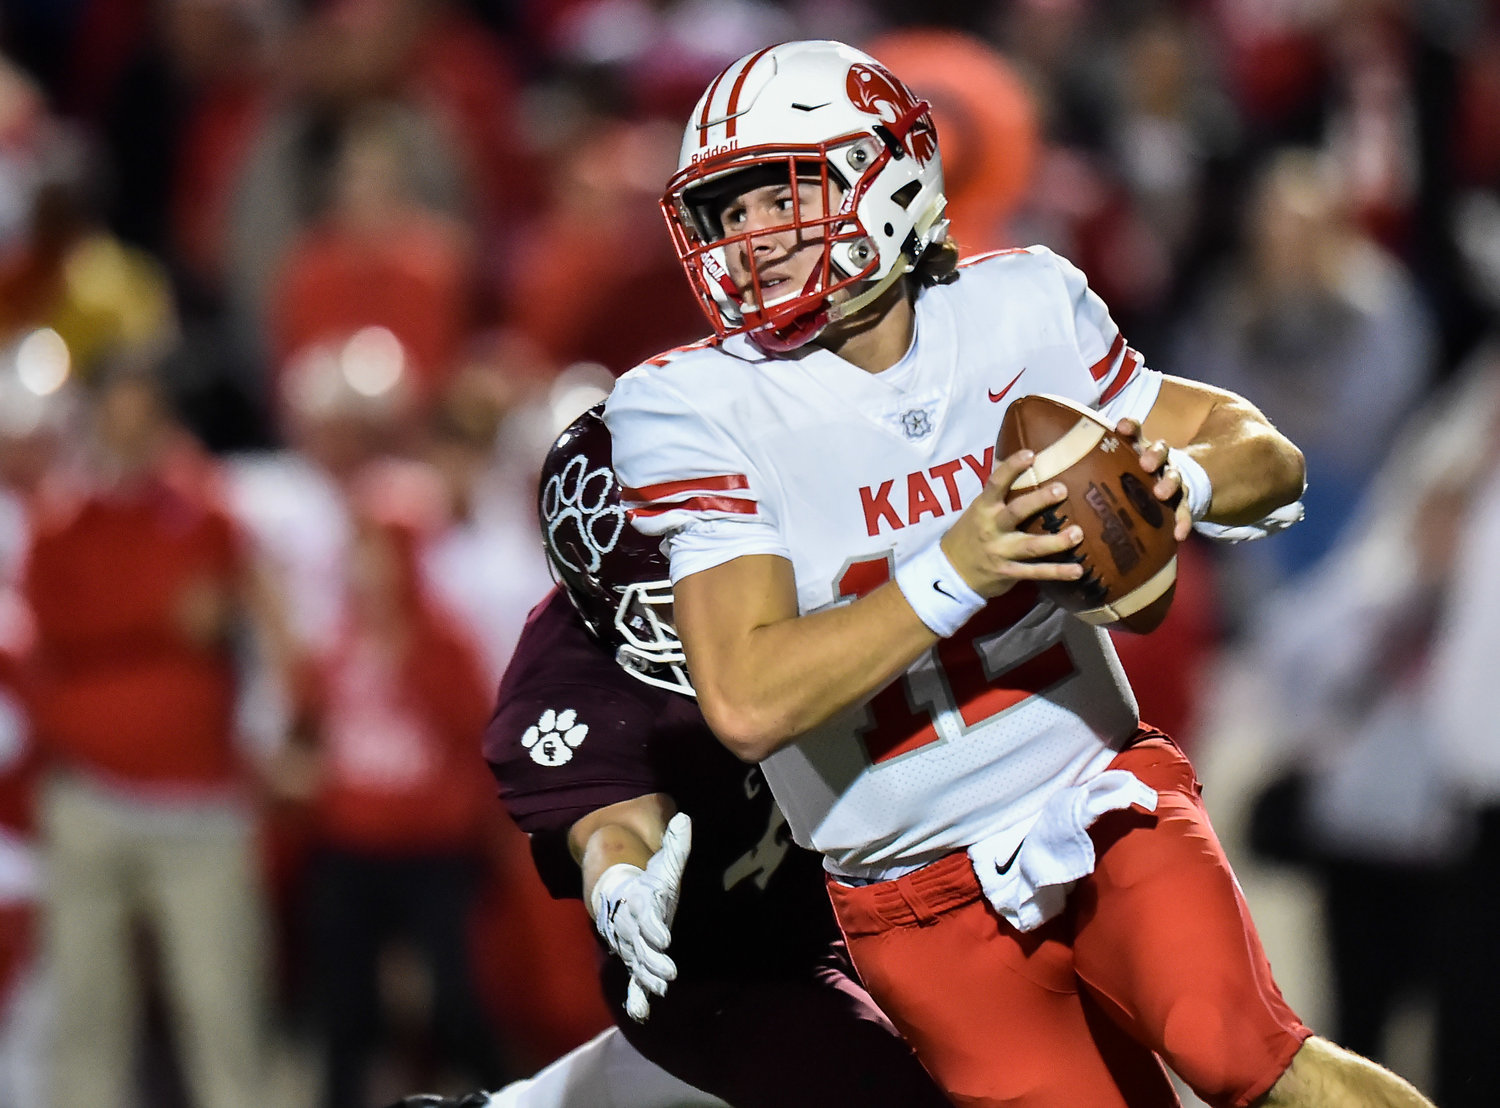 Houston, Tx. Nov. 22, 2019: Katy's QB Bronson McClelland (12) scrambles out of the pocket during the area playoff game between Katy Tigers and Cy-Fair Bobcats at Tully Stadium. (Photo by Mark Goodman / Katy Times)